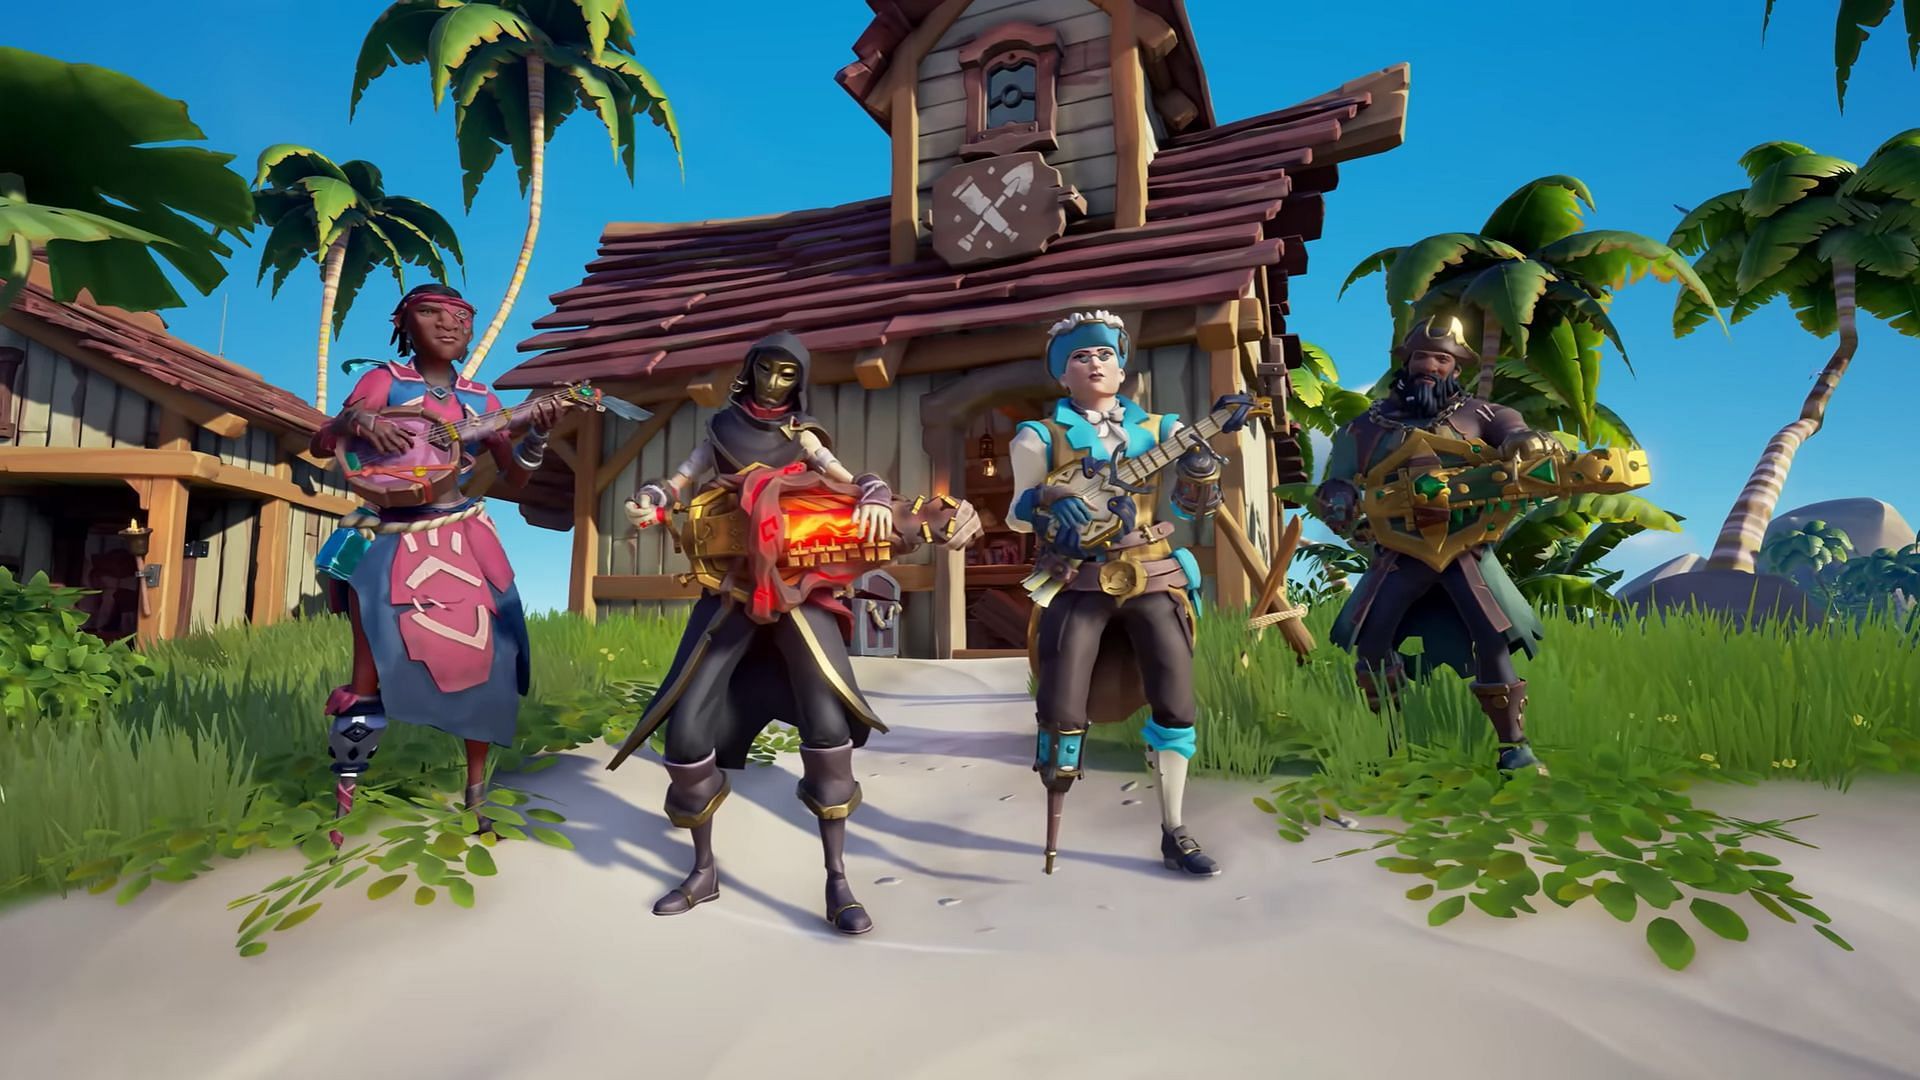 New cosmetic items in Sea of Thieves (Image via Sea of Thieves)